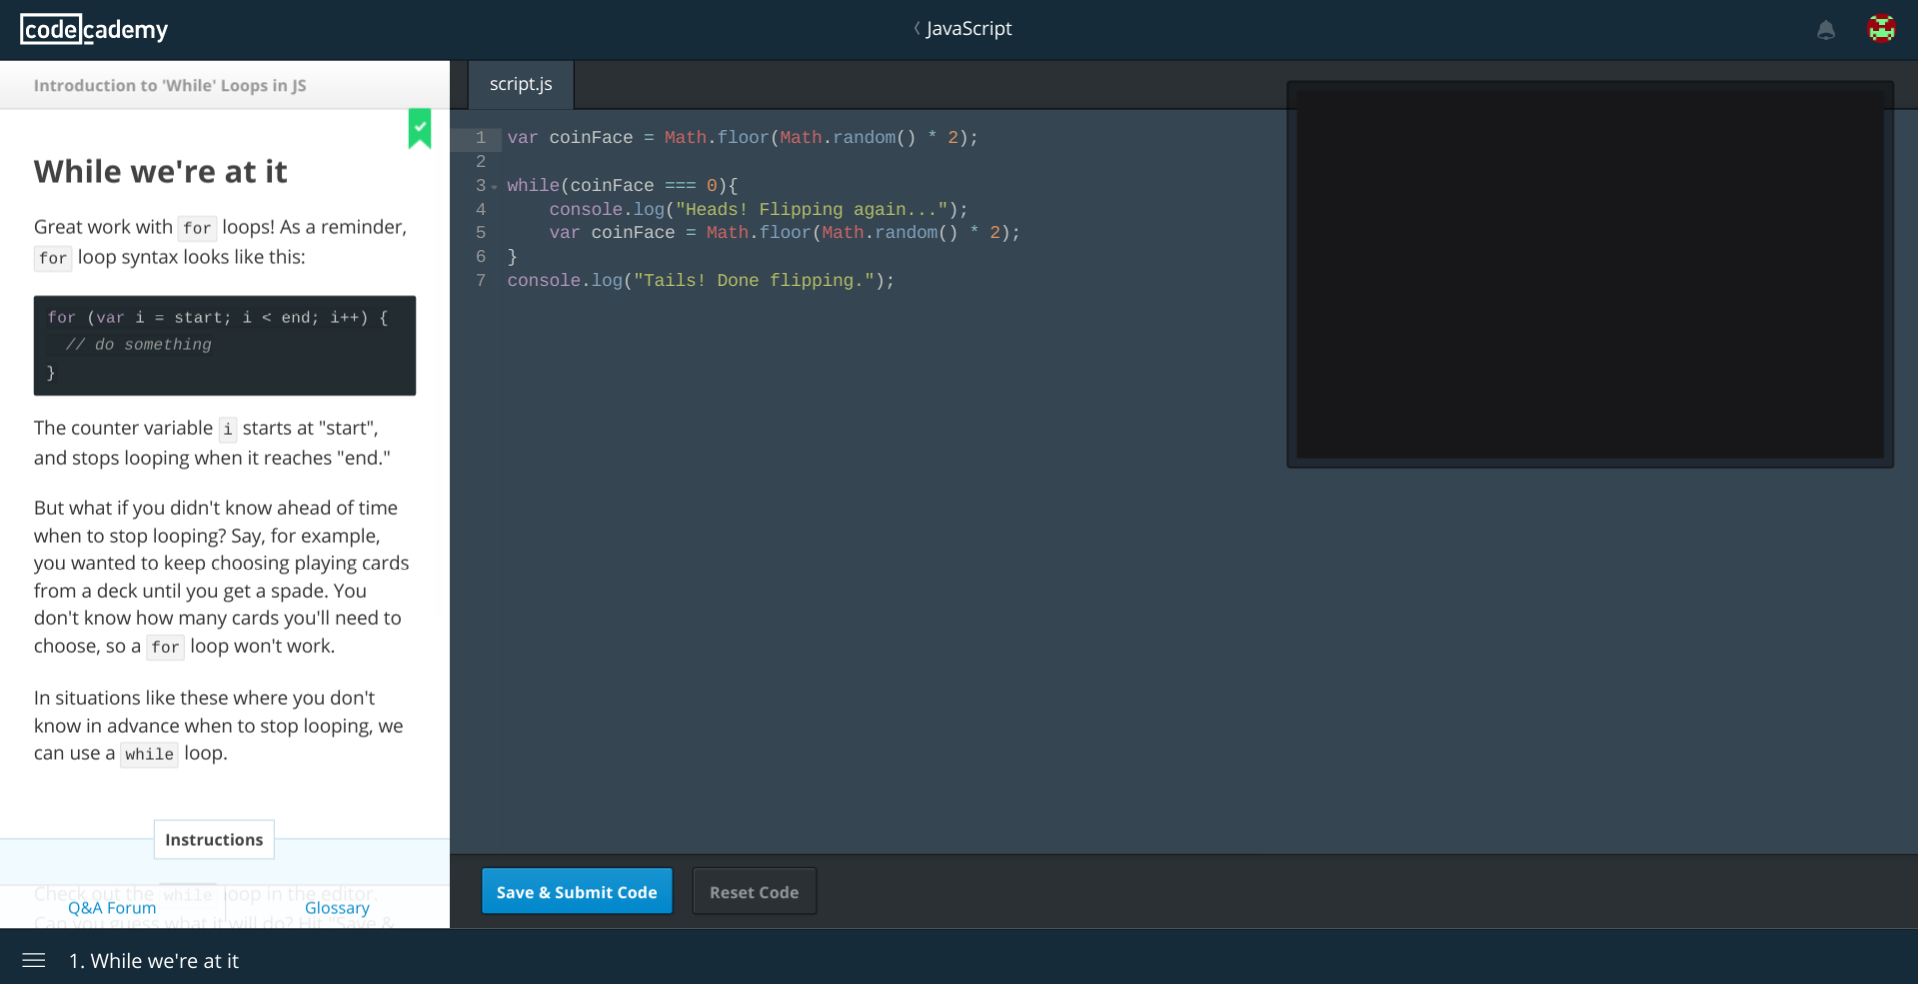 codecademy link it up answers